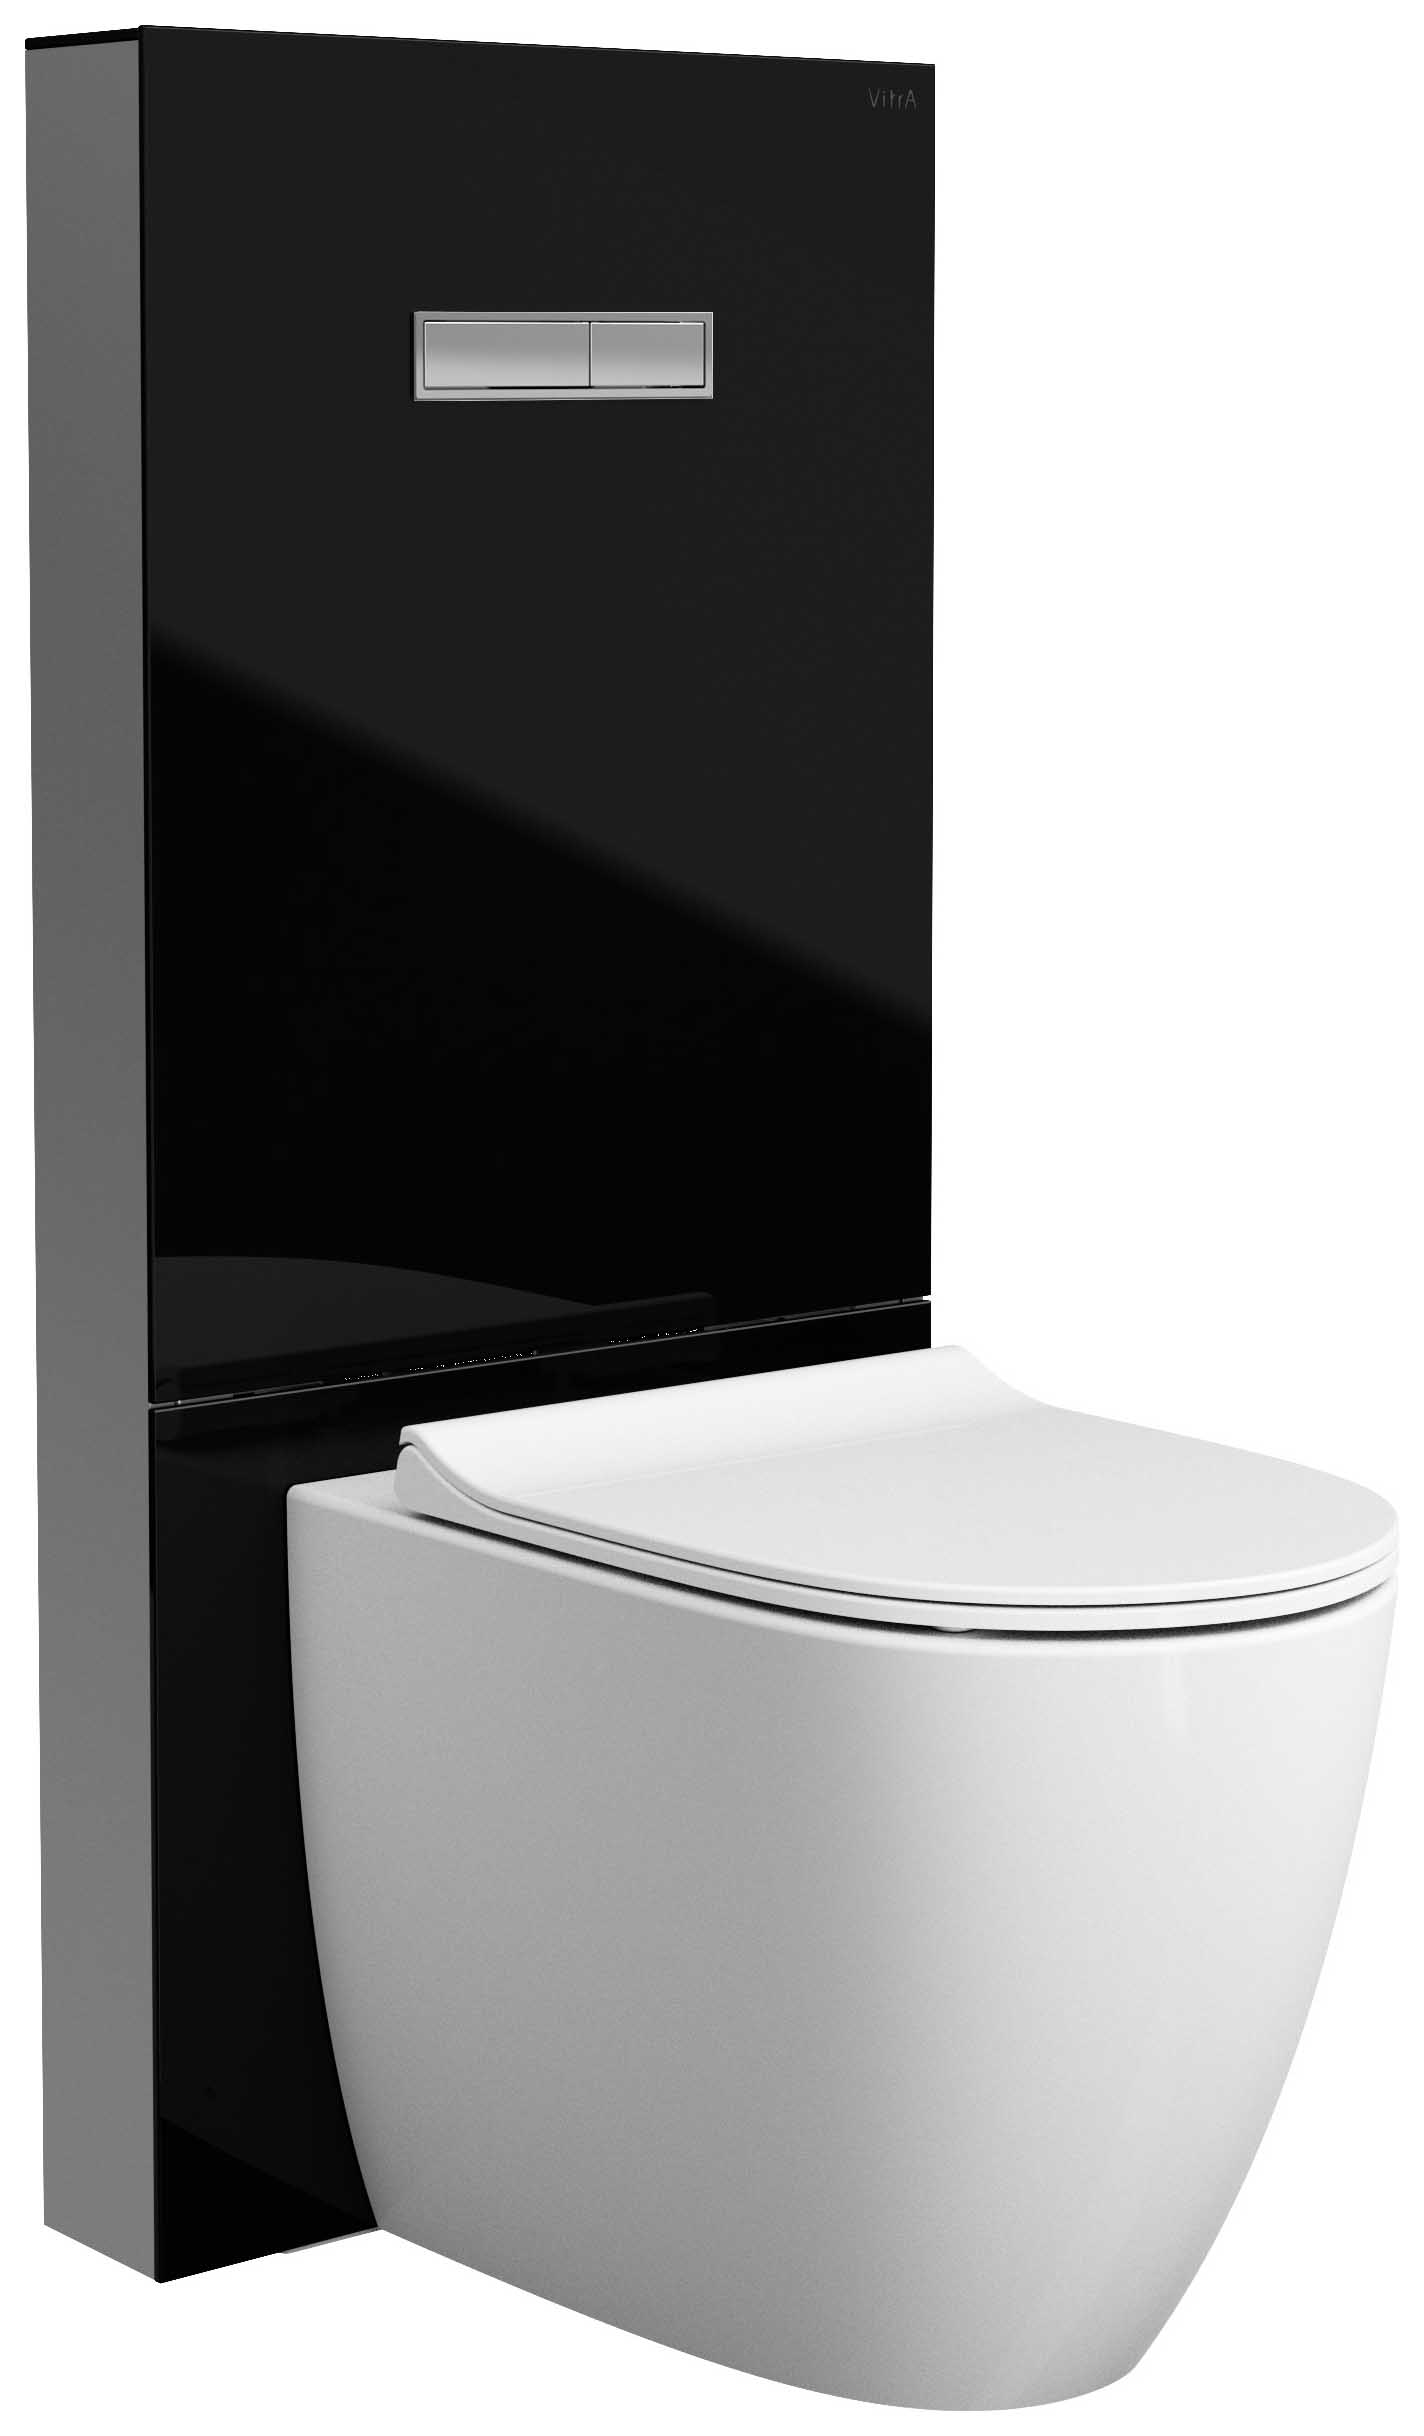 Image of VitrA Vitrus Glass Surround Concealed Cistern for Back To Wall Toilet Pans - Black